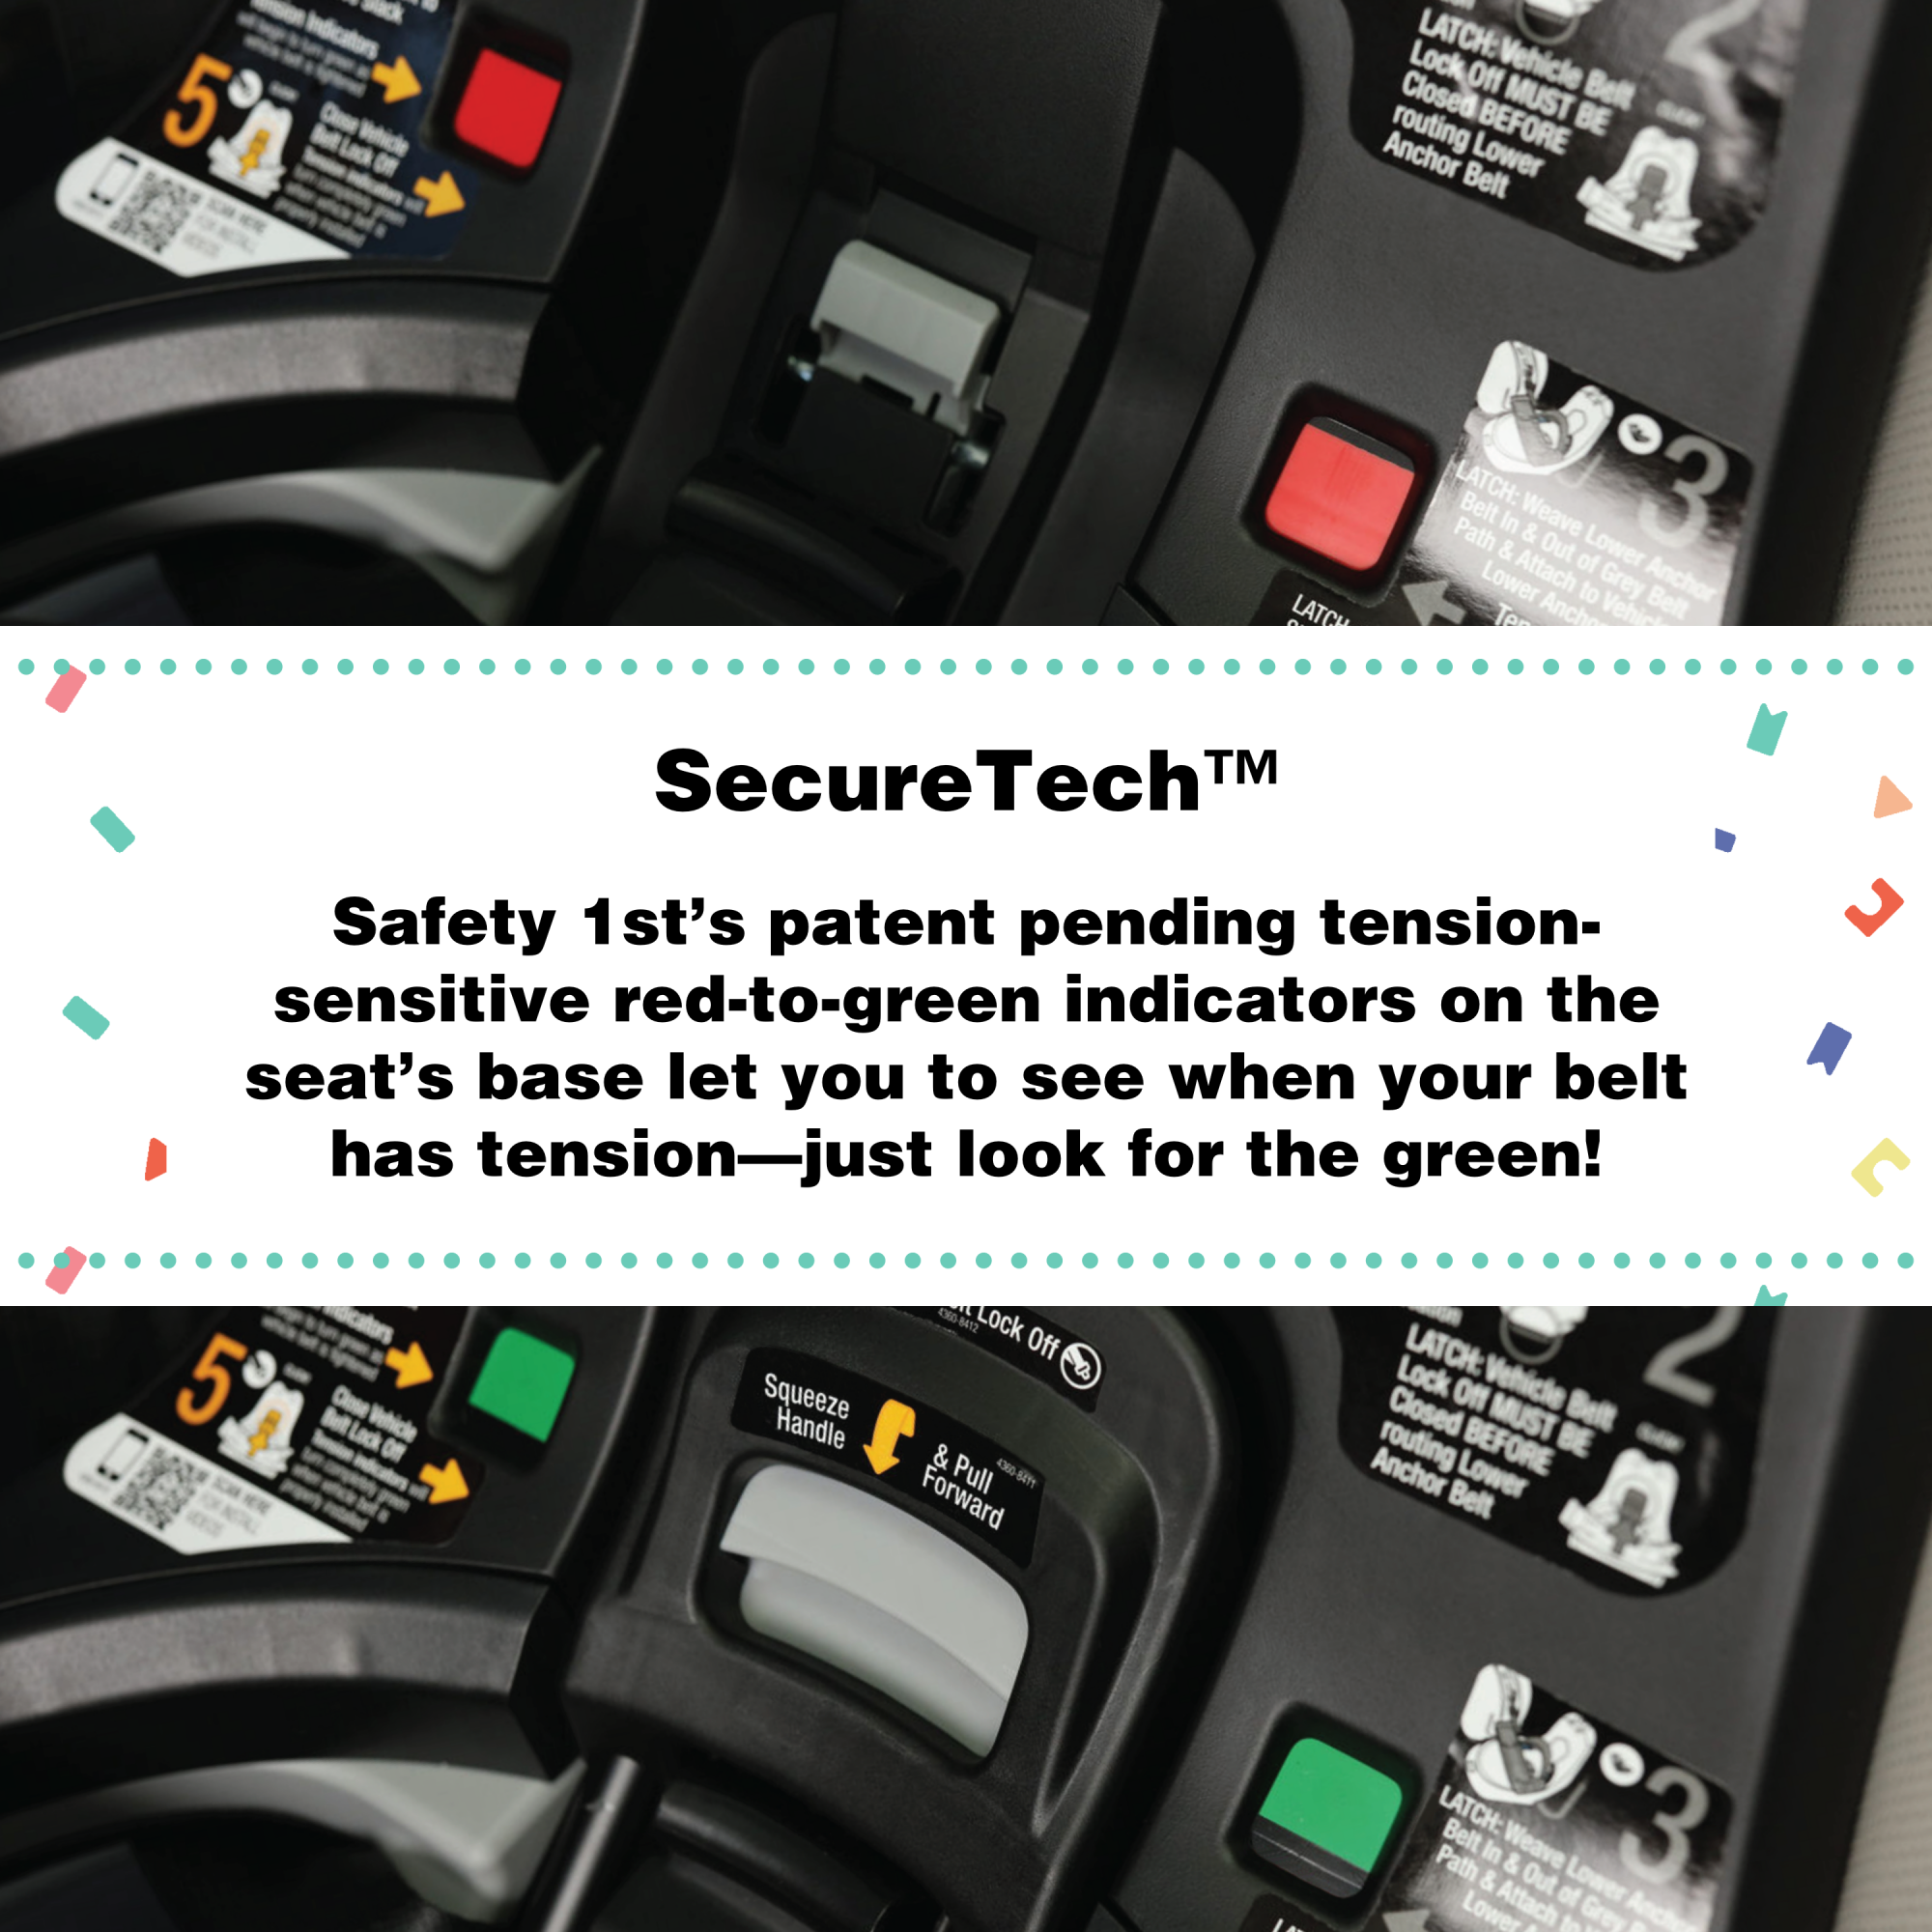 Disney Baby Turn and Go 360 Rotating All-in-One Convertible Car Seat - SecureTech - Safety 1st's patent pending tension-sensitive red-to-green indicators on the seat's base let you see when your belt has tension - just look for the green!